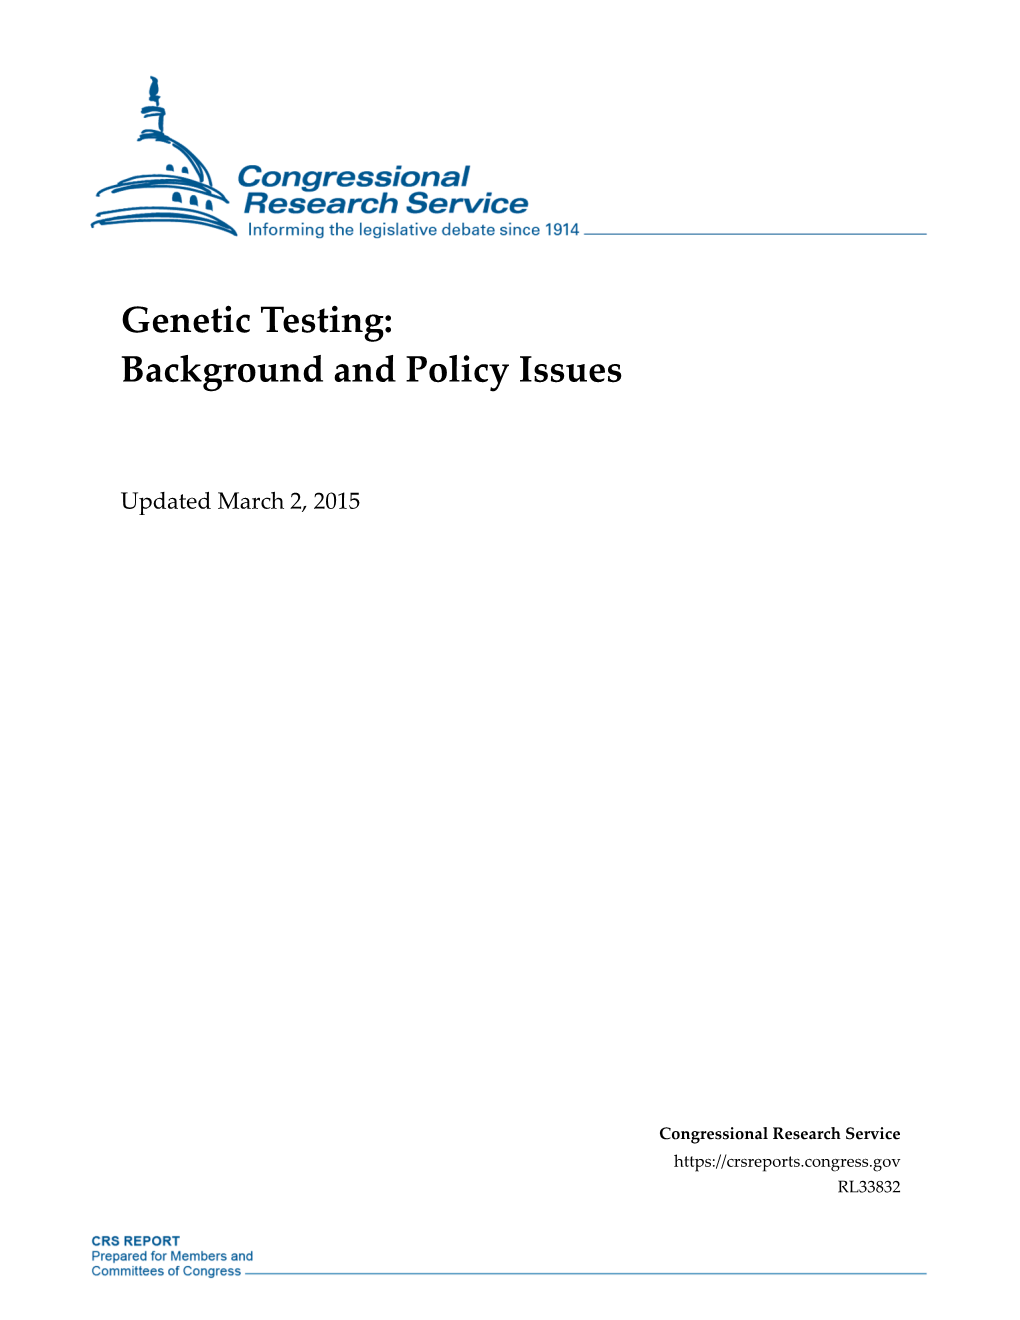 Genetic Testing: Background and Policy Issues